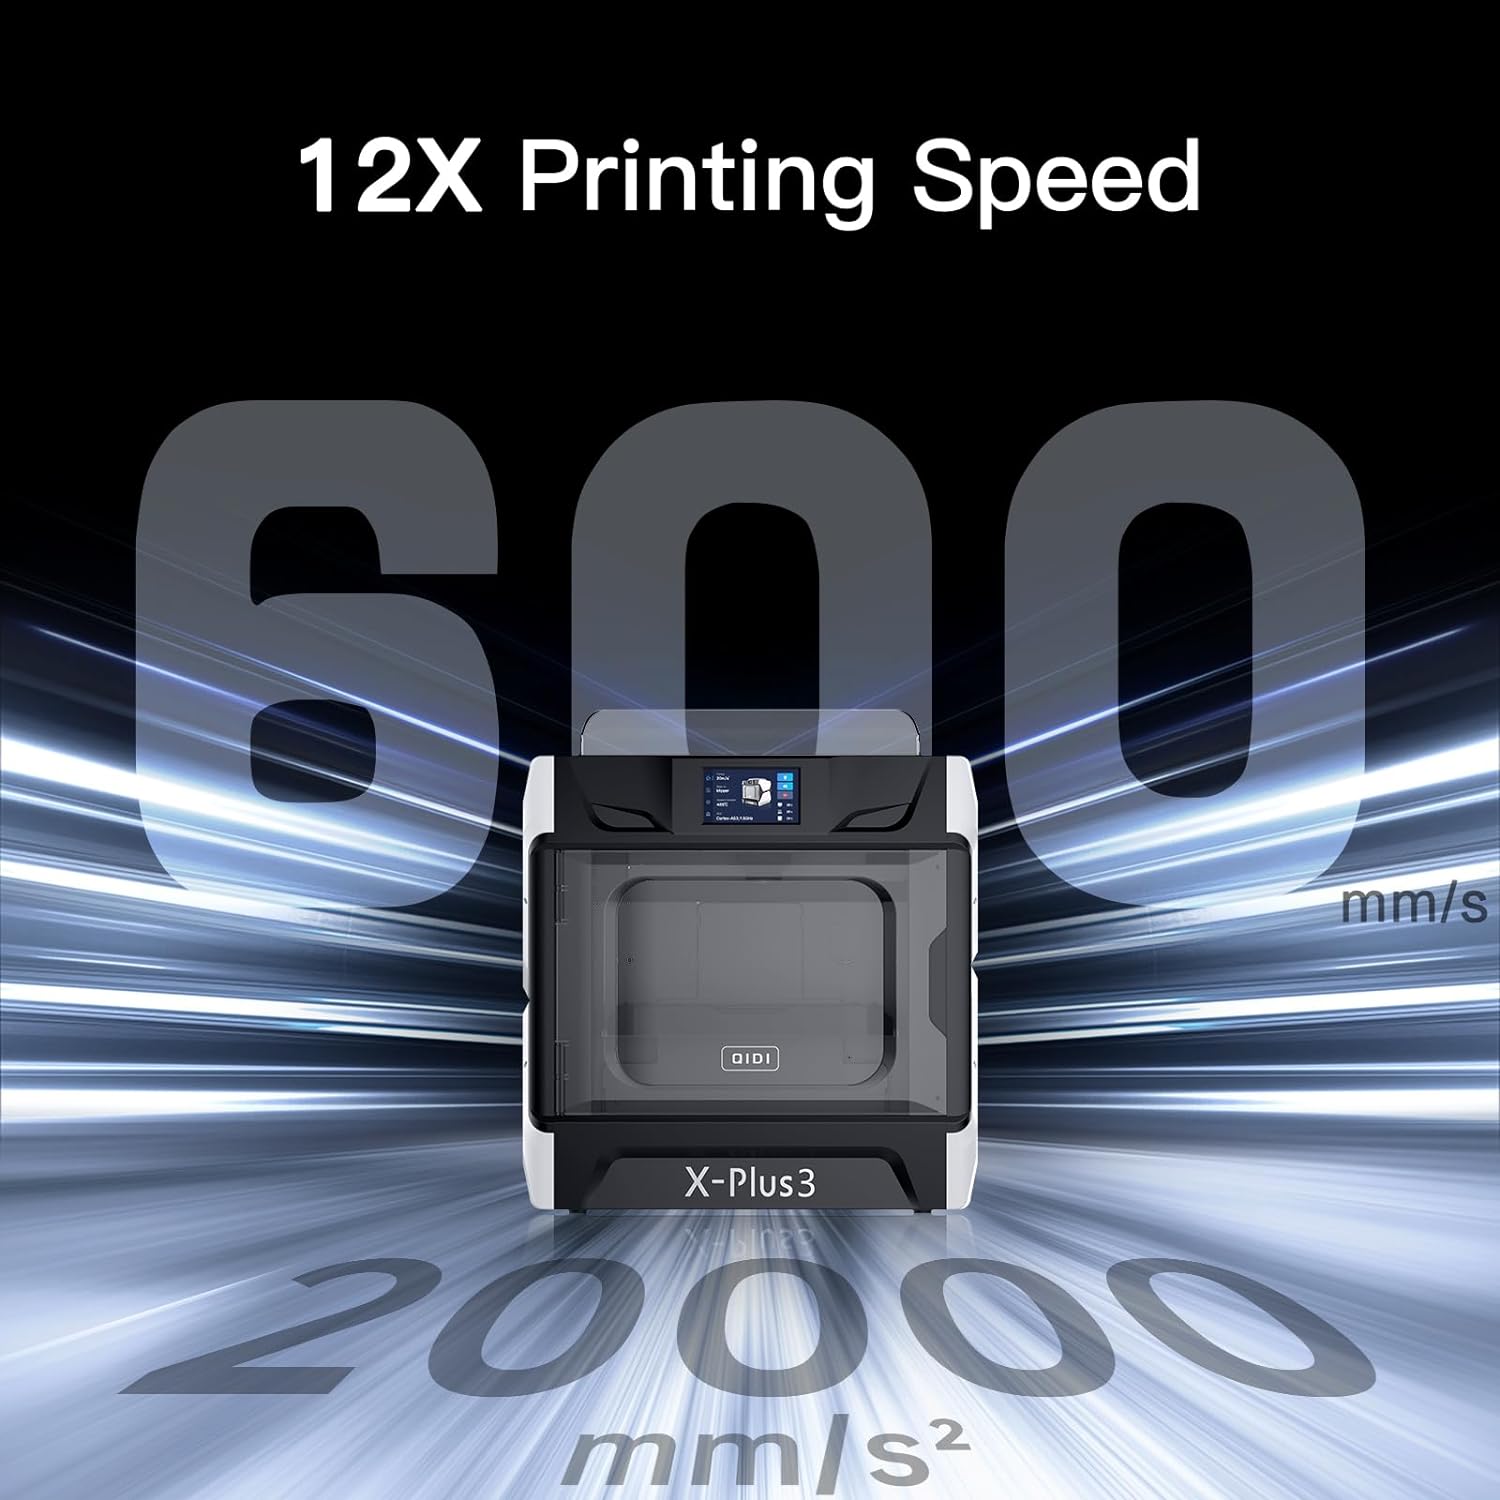 r-qidi-technology-x-plus3-3d-printers-fully-upgrade-600mms-industrial-grade-high-speed-3d-printer-acceleration-20000mms2-1 R QIDI TECHNOLOGY X-PLUS3 3D Printer Review